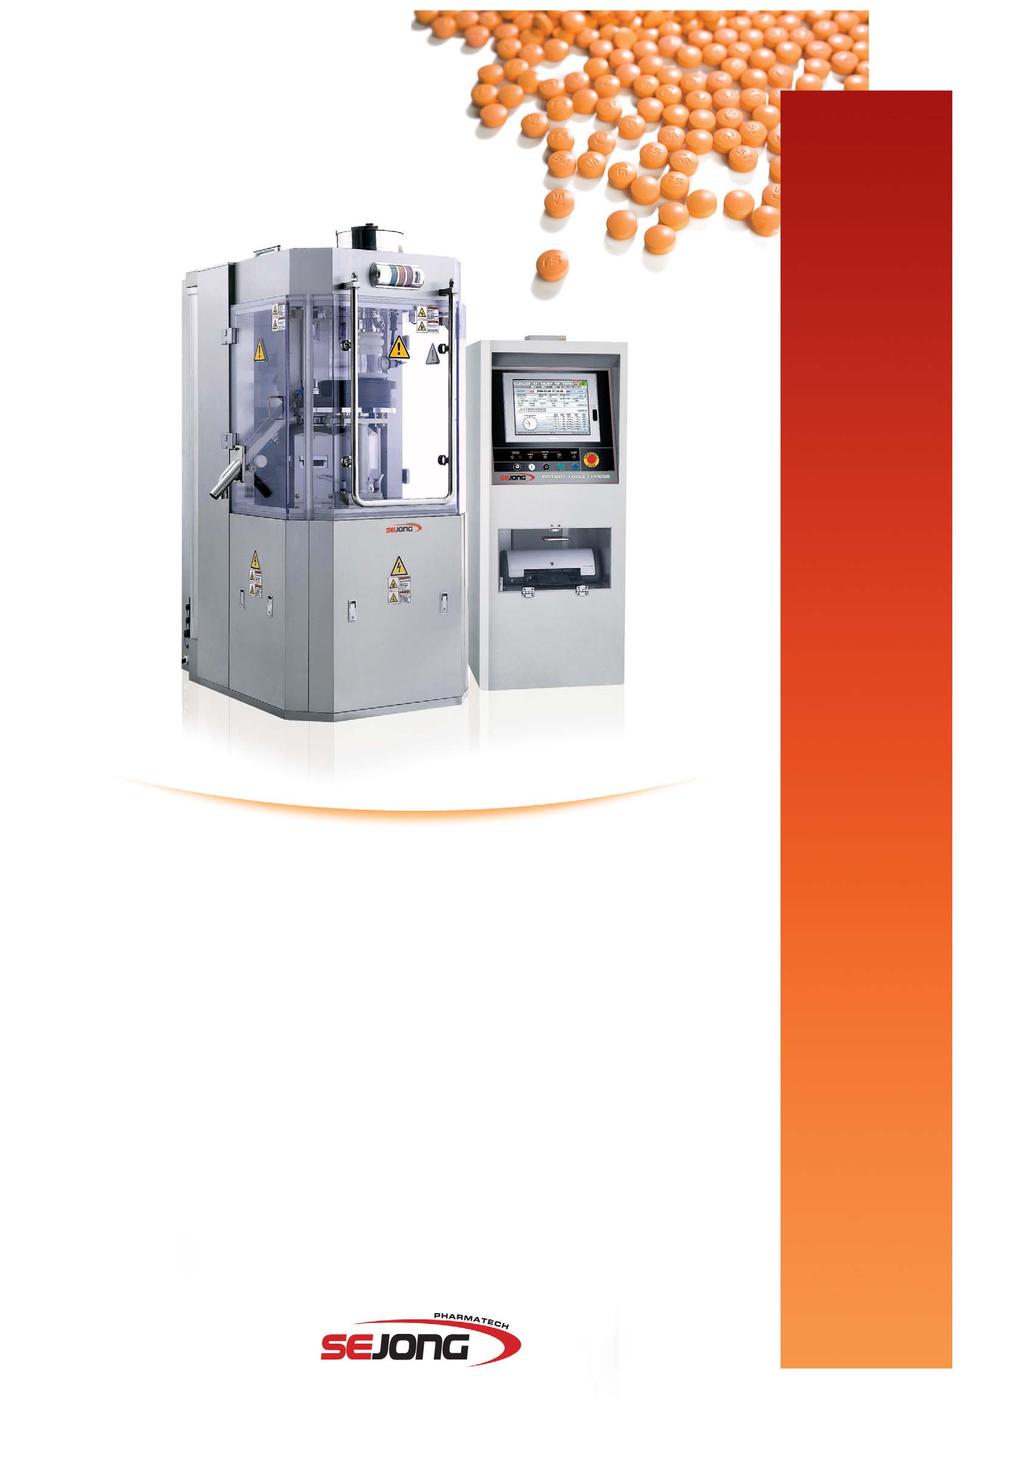 GRC-S series of Sejong Pharmatech is designed and produced to be suitable for pharmaceutical company s labs, university research institutes, or small-scale production lines, while being characterized